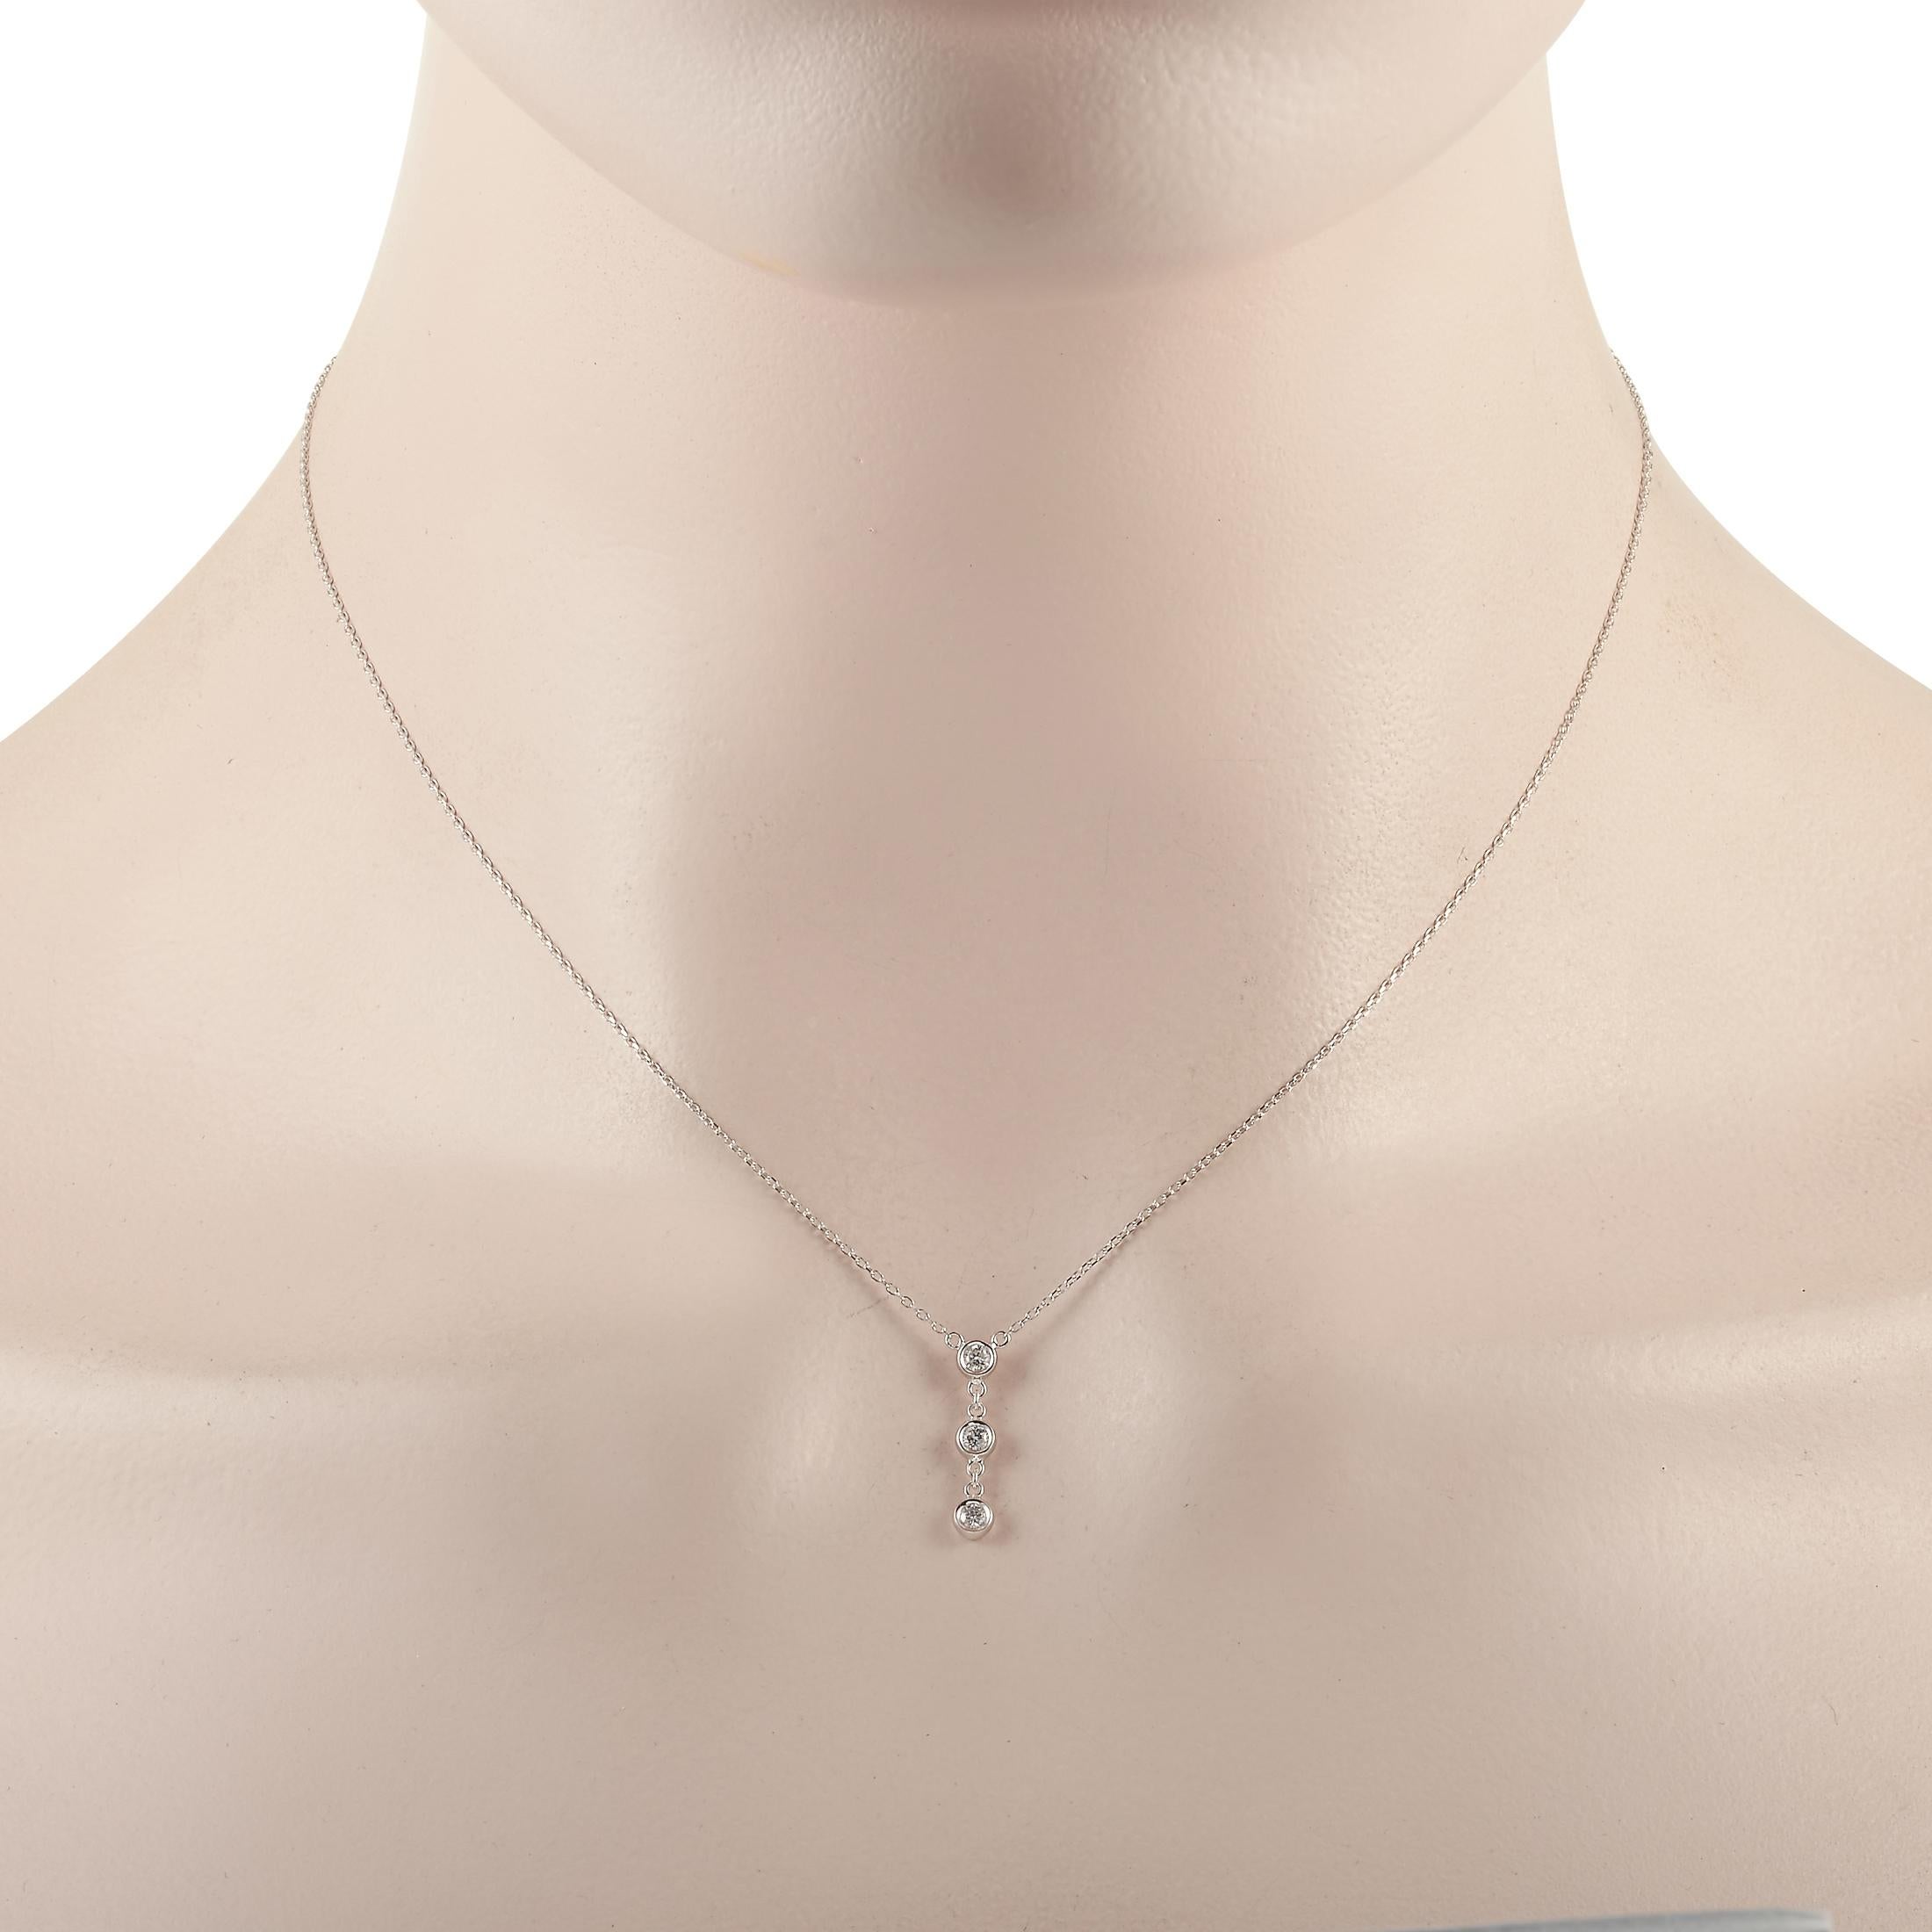 This LB Exclusive necklace is crafted from 14K white gold and weighs 1.4 grams. It is presented with a 15” chain and boasts a pendant that measures 0.68” in length and 0.13” in width. The necklace is set with diamonds that total 0.15 carats.
 
